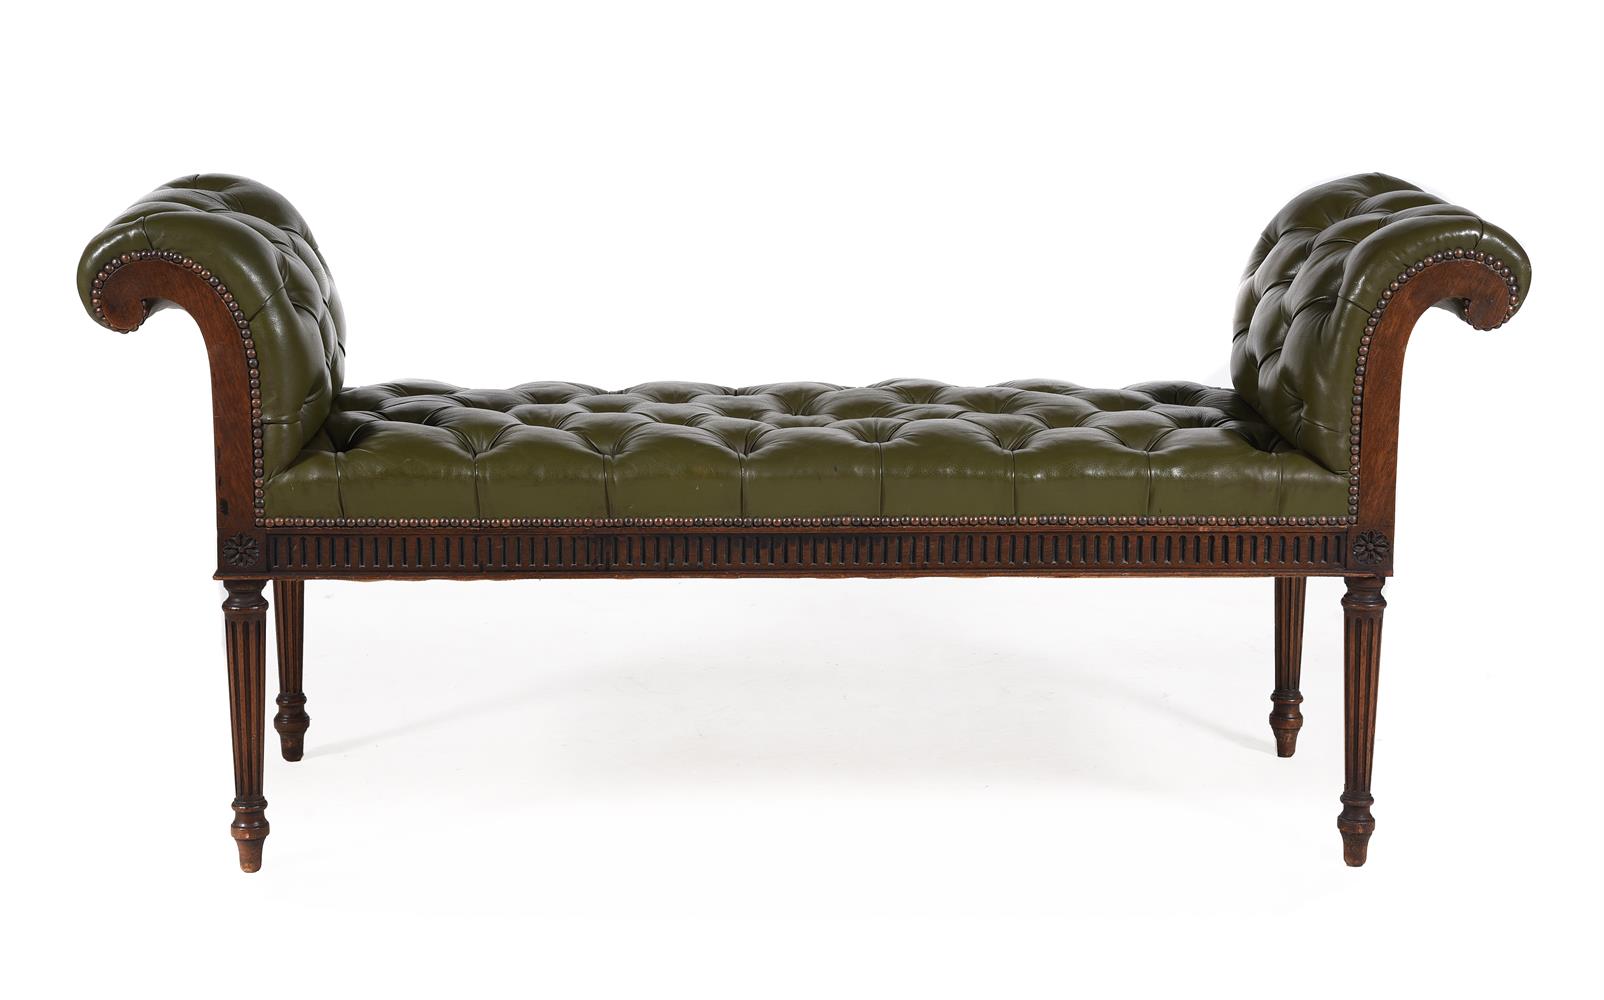 A MAHOGANY AND BUTTONED GREEN LEATHER UPHOLSTERED STOOL OR WINDOW SEAT, IN GEORGE III STYLE - Image 2 of 4